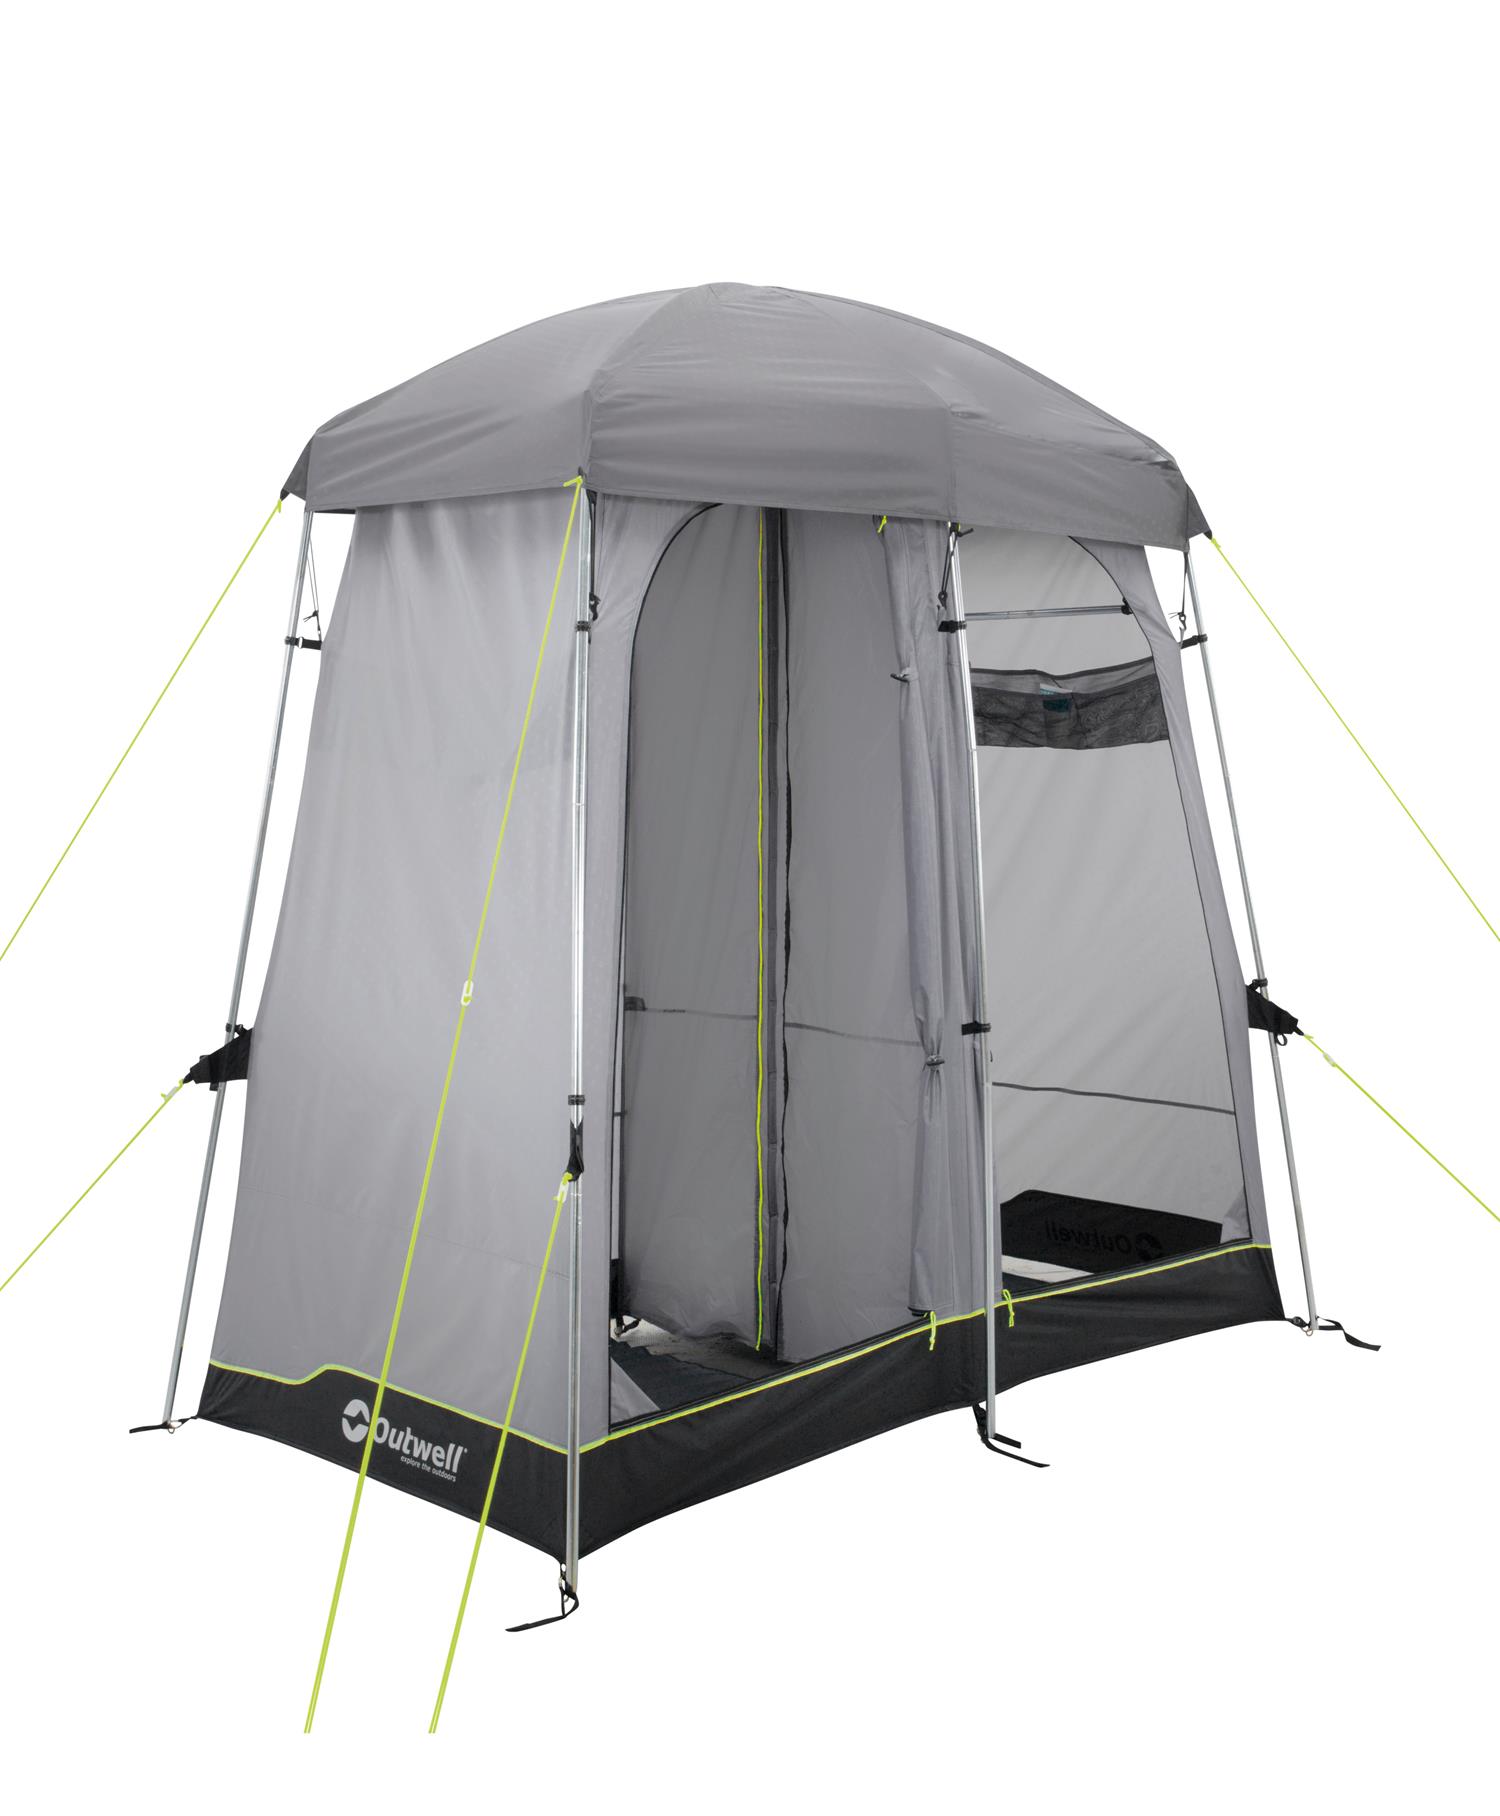 Outwell Seahaven Comfort Tent (Double) Toilet and Storage Tents | Leisureshopdirect